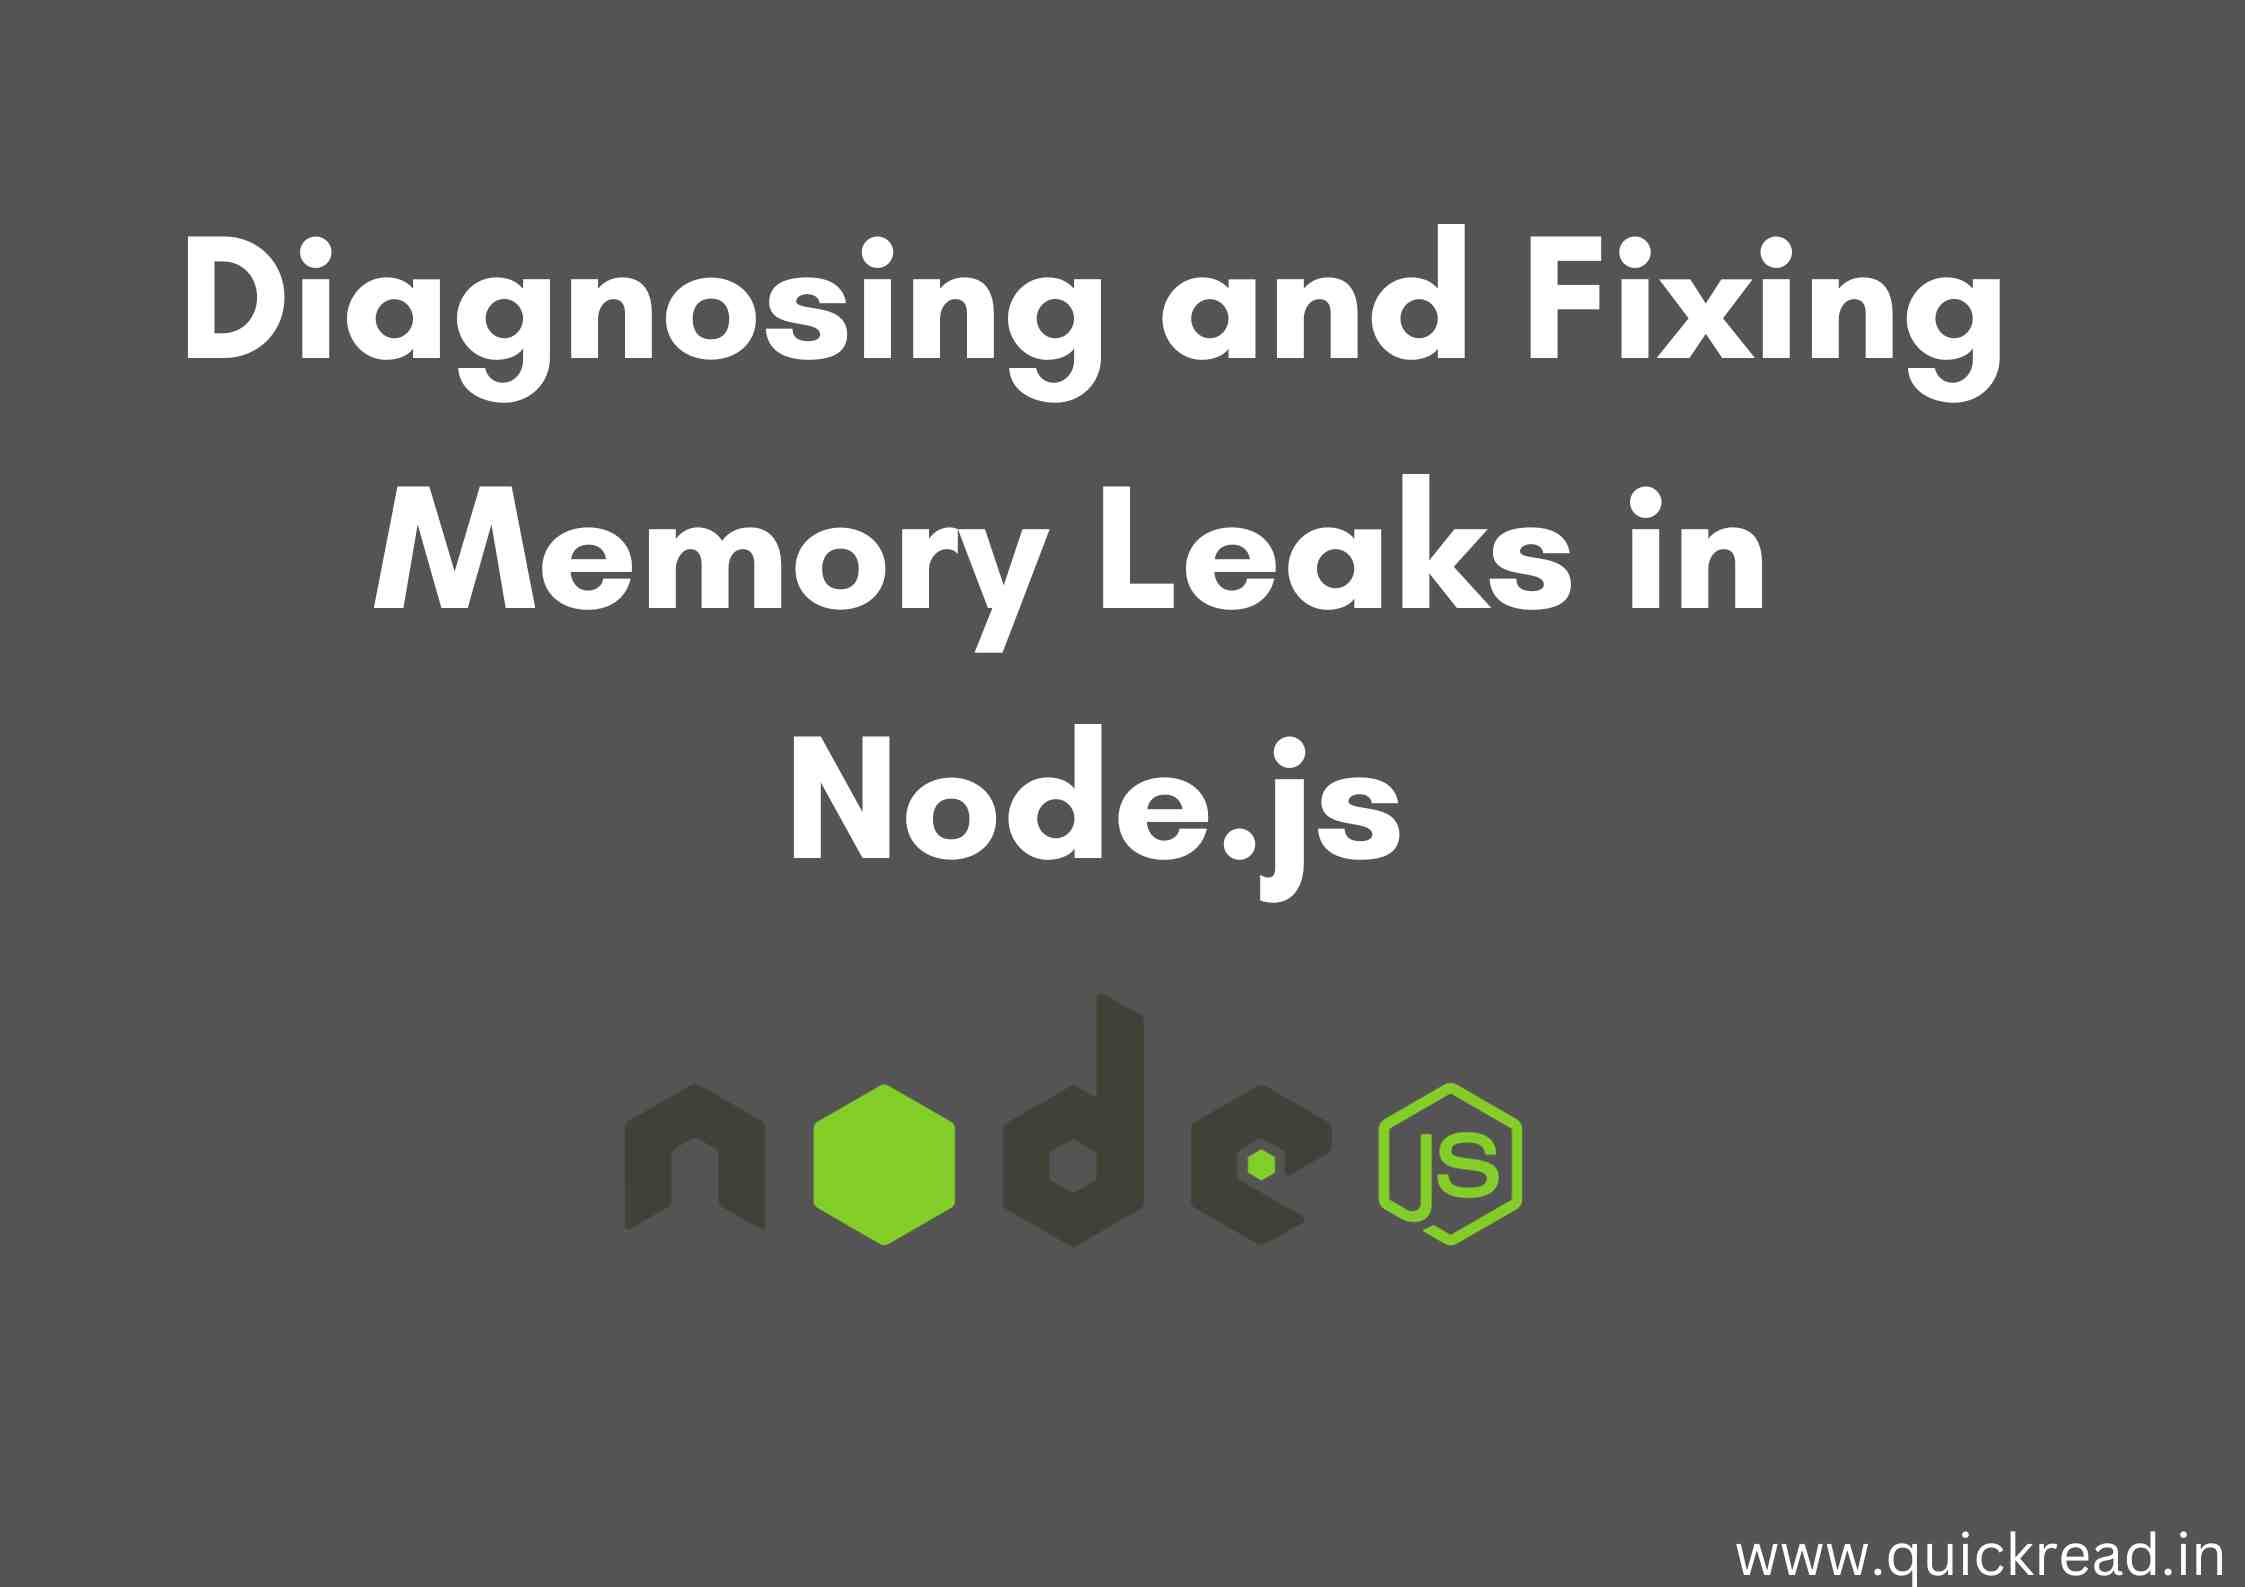 Diagnosing and Fixing Memory Leaks in Node.js